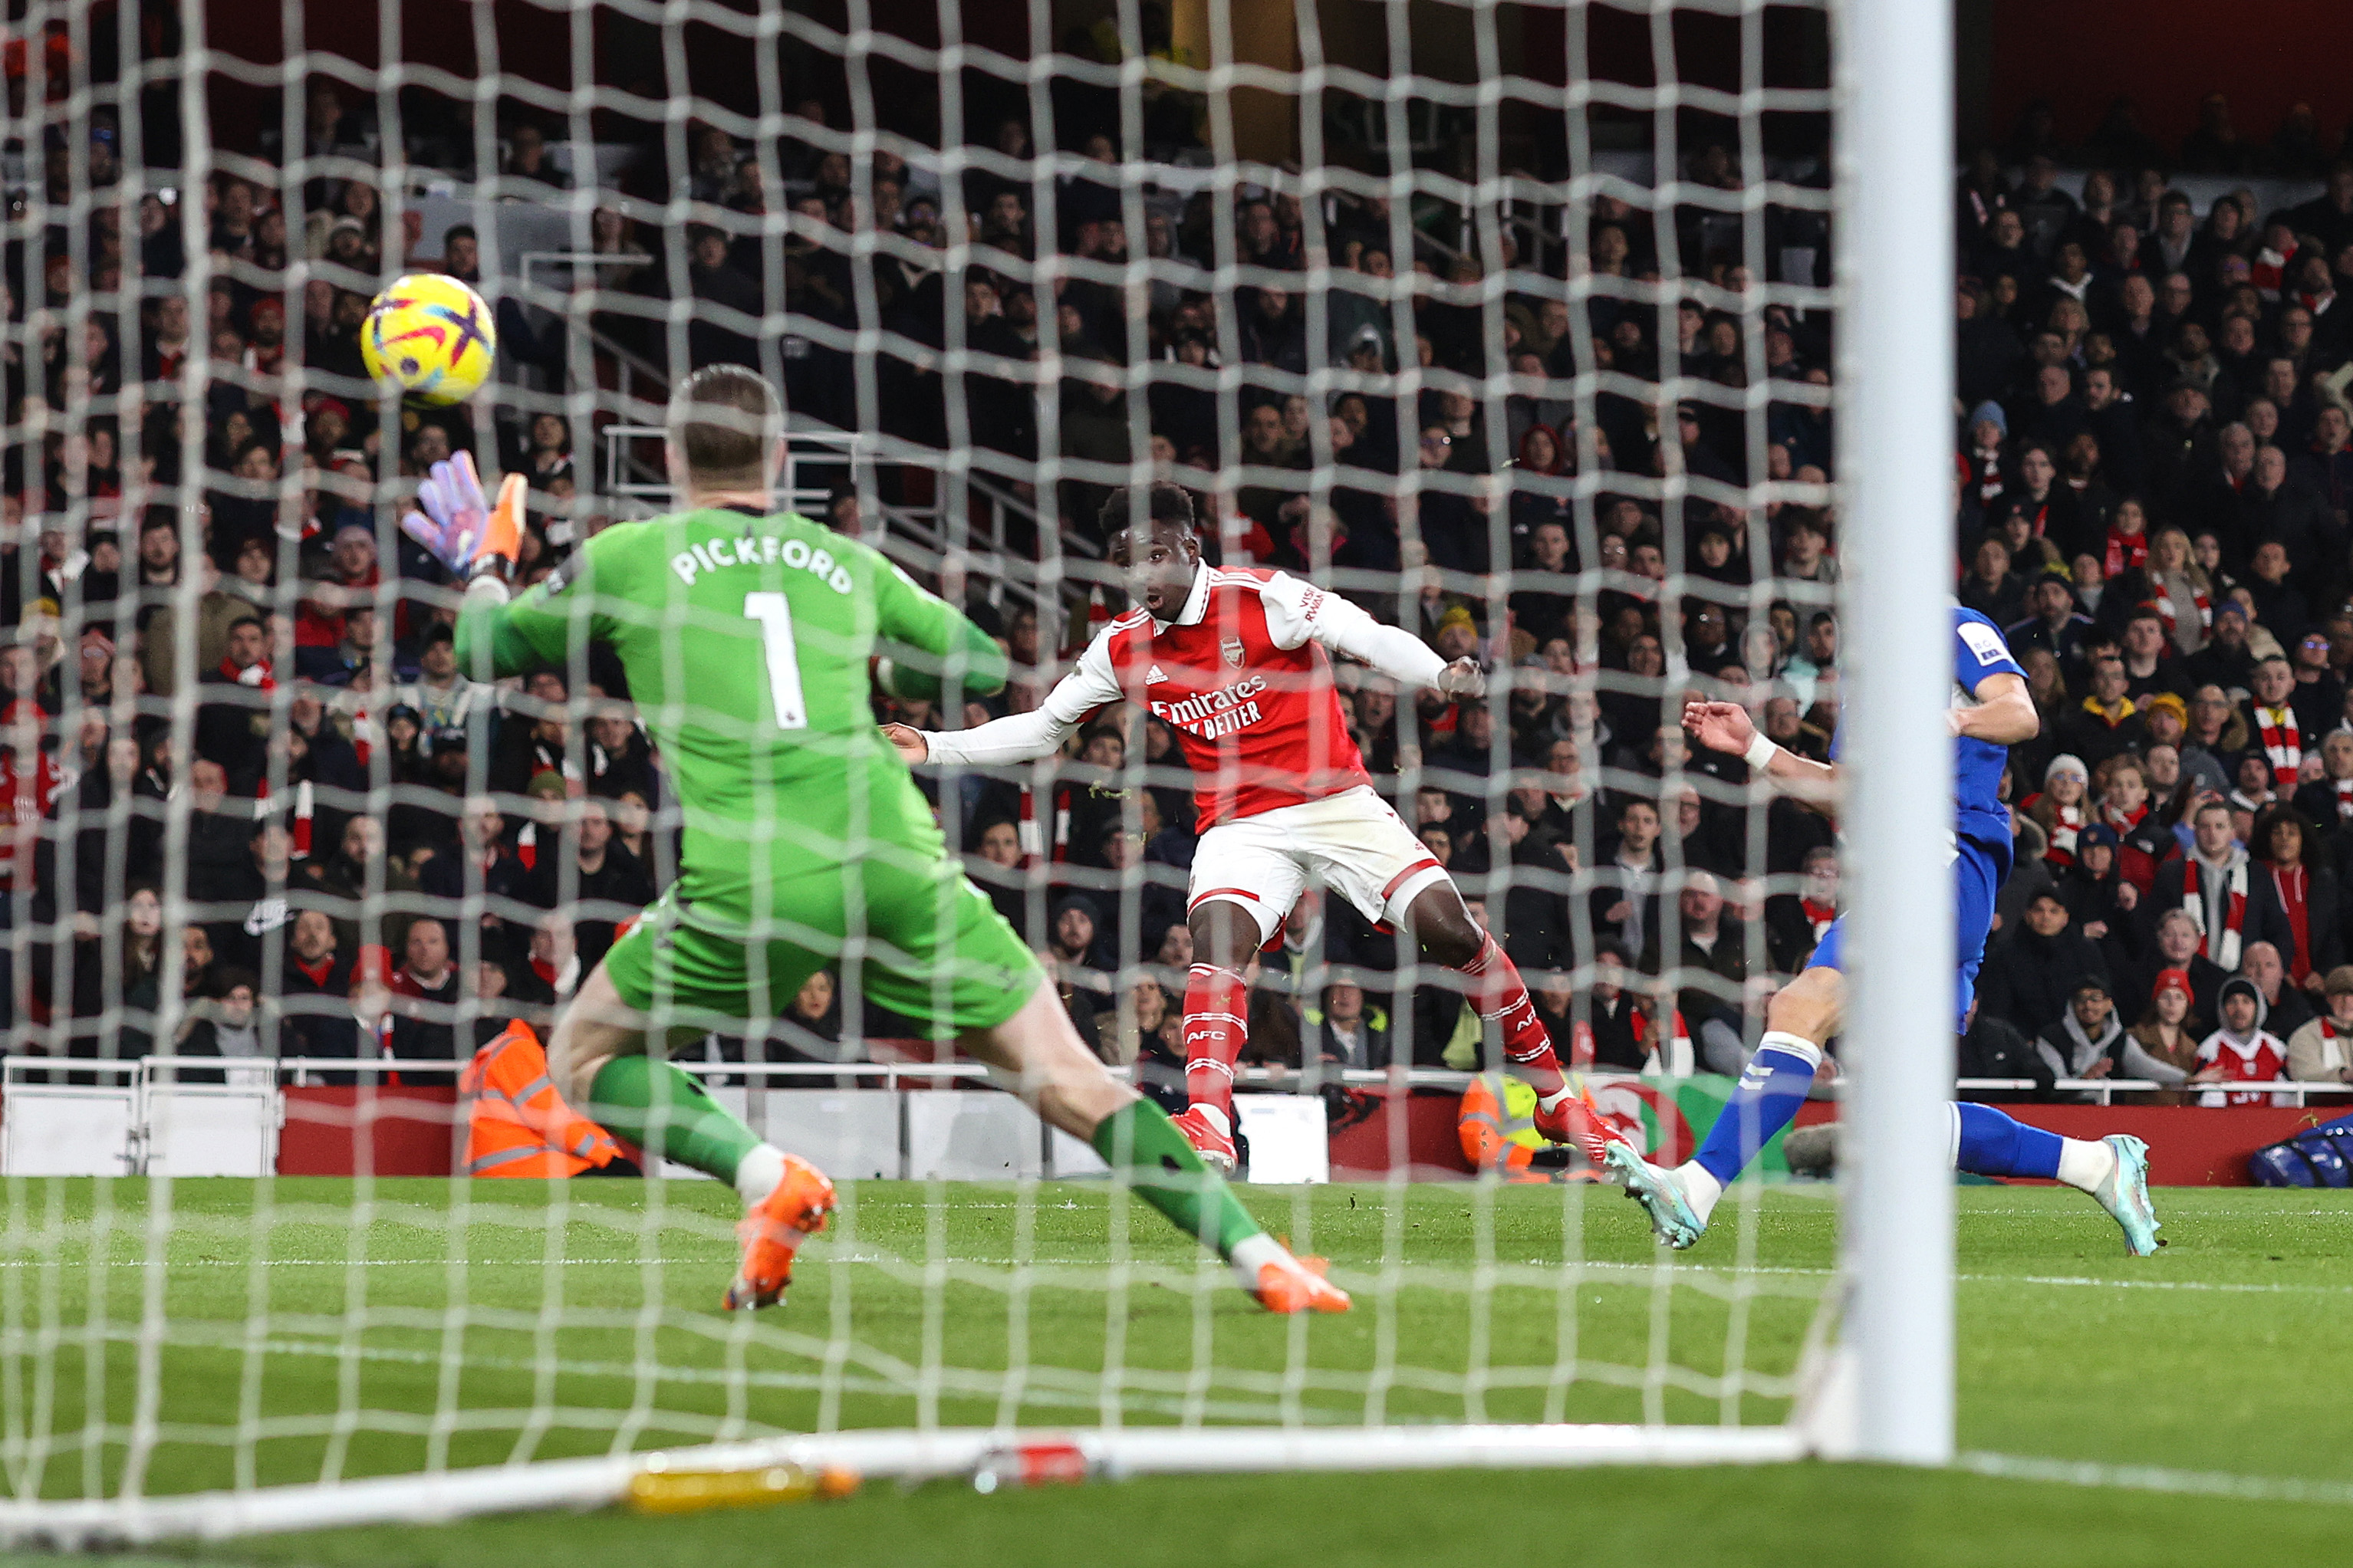 Arsenal thrash Everton 4-0 to move five points clear at the top of the Premier League 